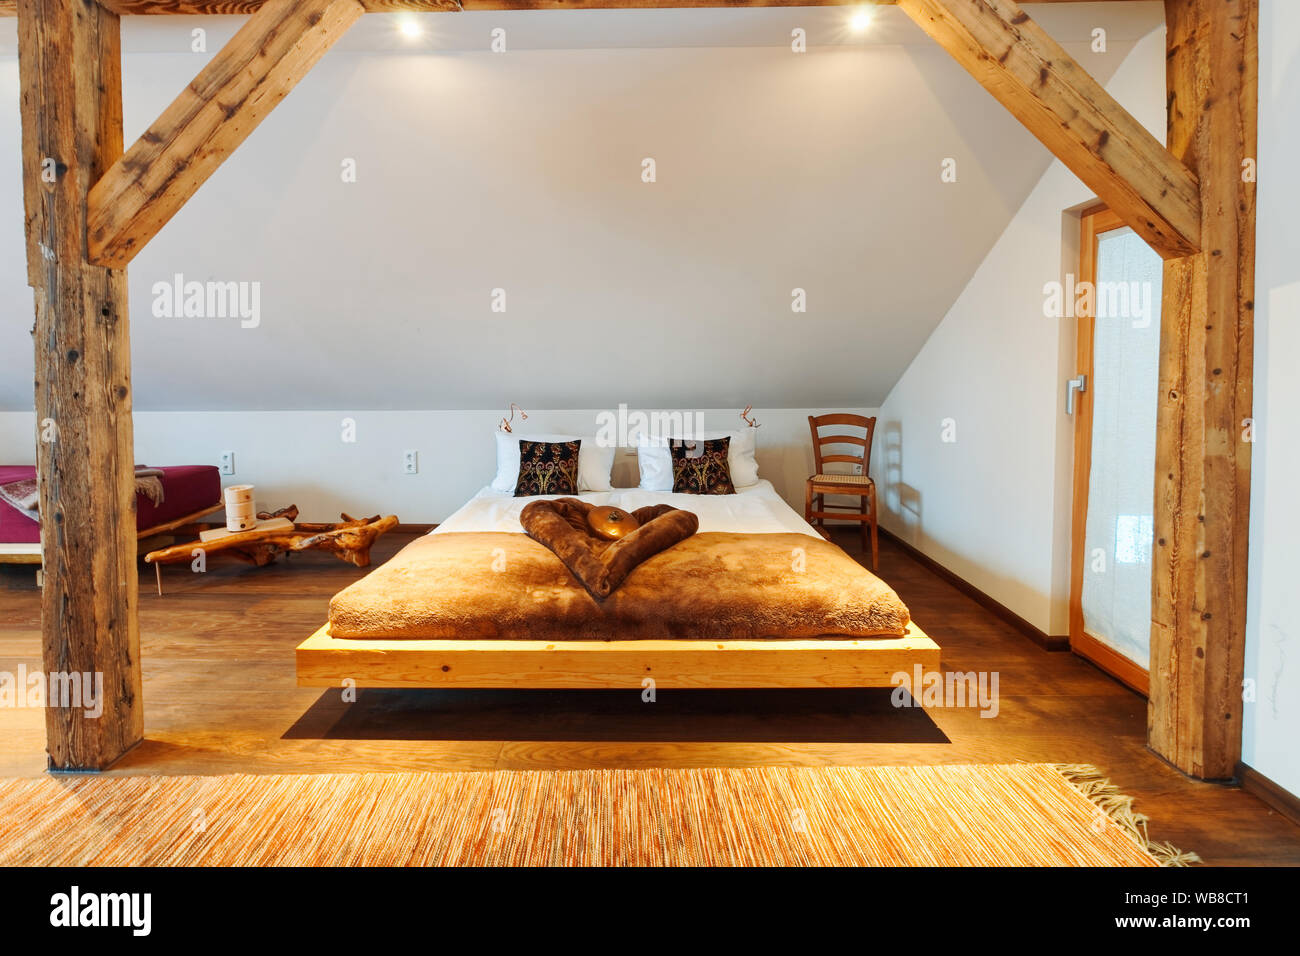 Interior With Bedroom Modern Design Of Bed Wooden